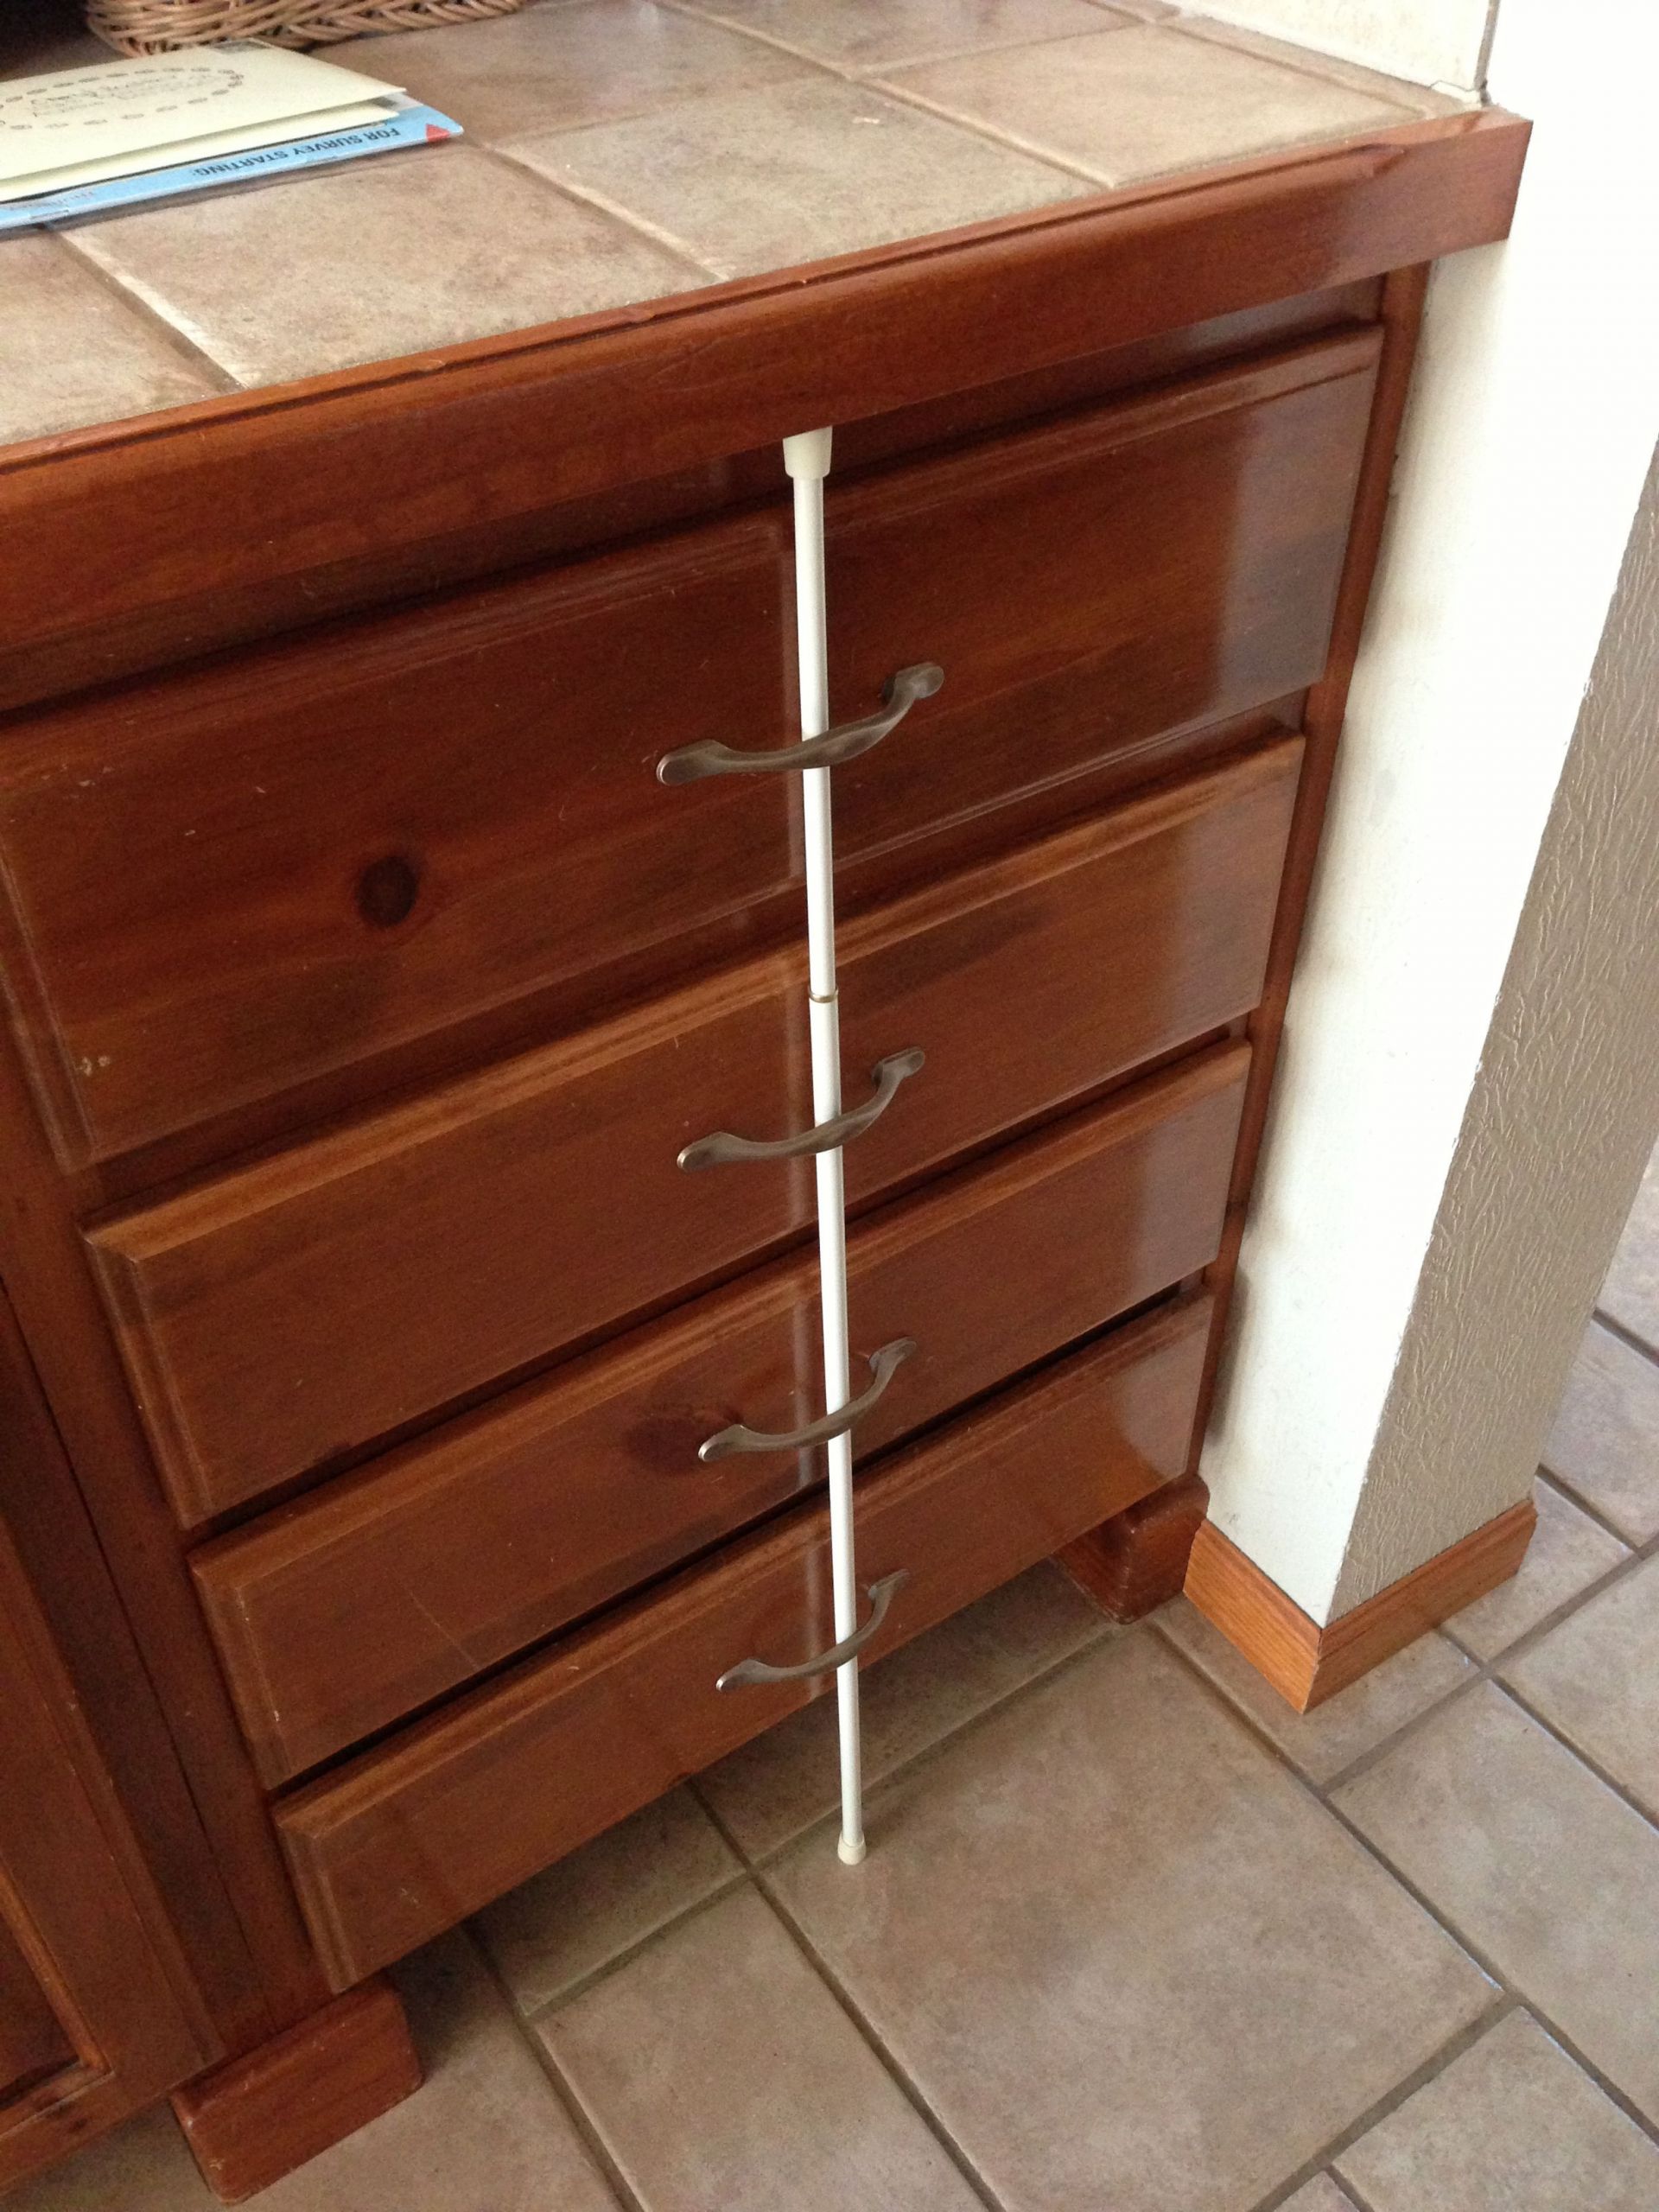 Baby Proof Cabinets DIY
 Childproof drawers use a tension rod to keep little ones